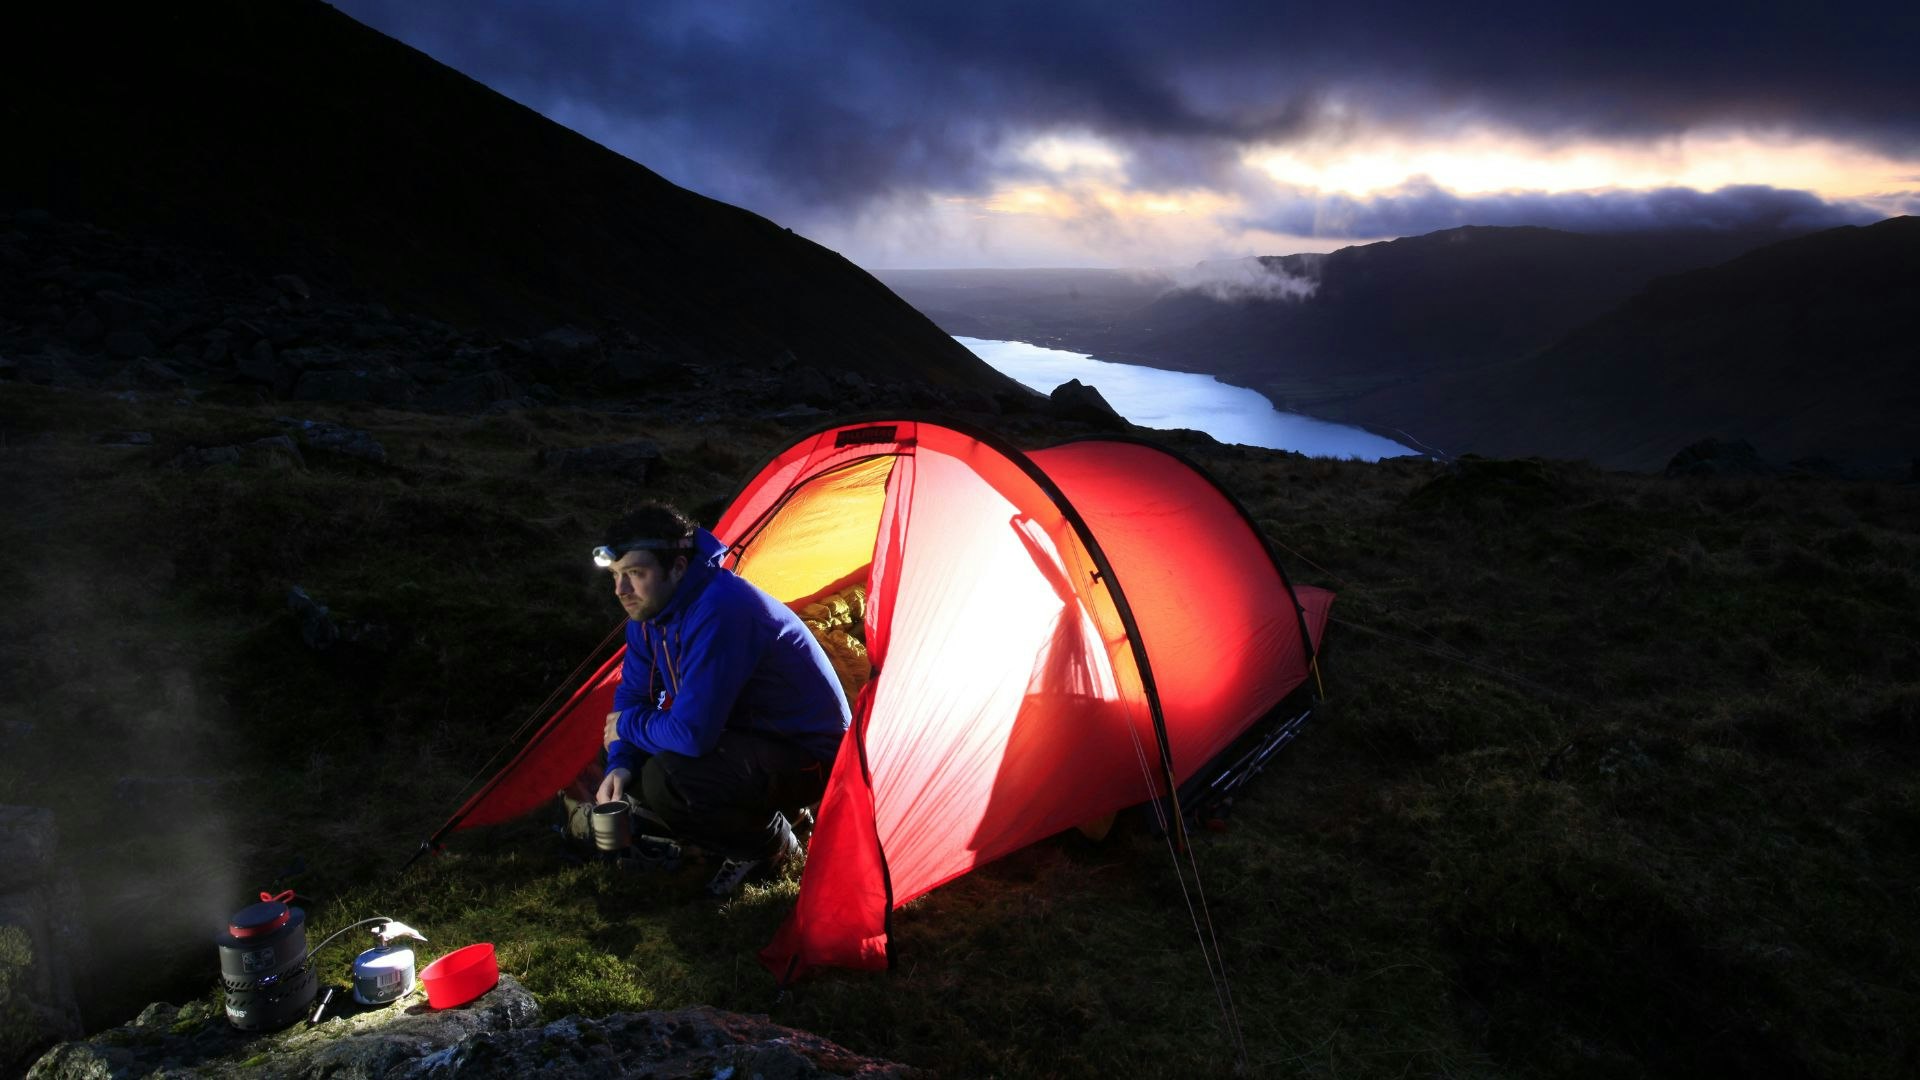 TOP 10 NEW CAMPING GEAR & GADGETS YOU MUST HAVE 2021 